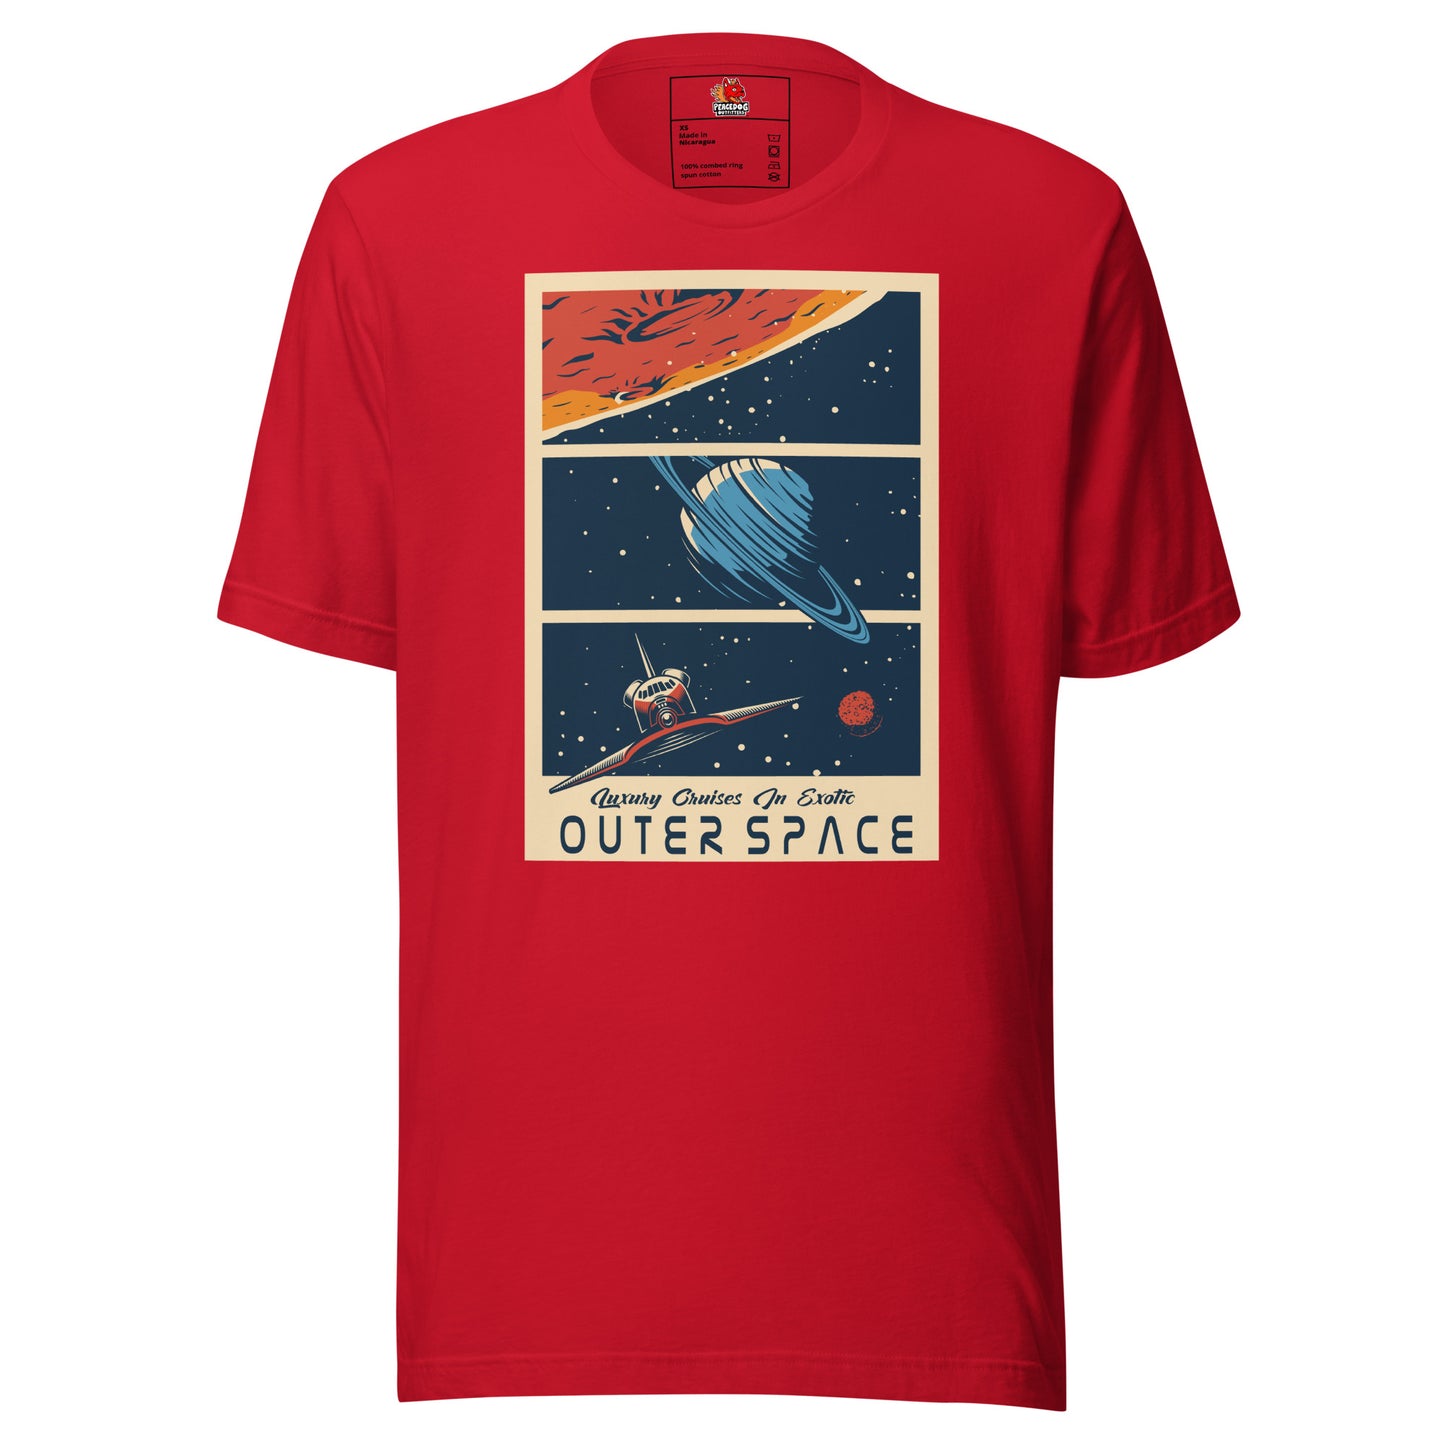 Outer Space T-shirt